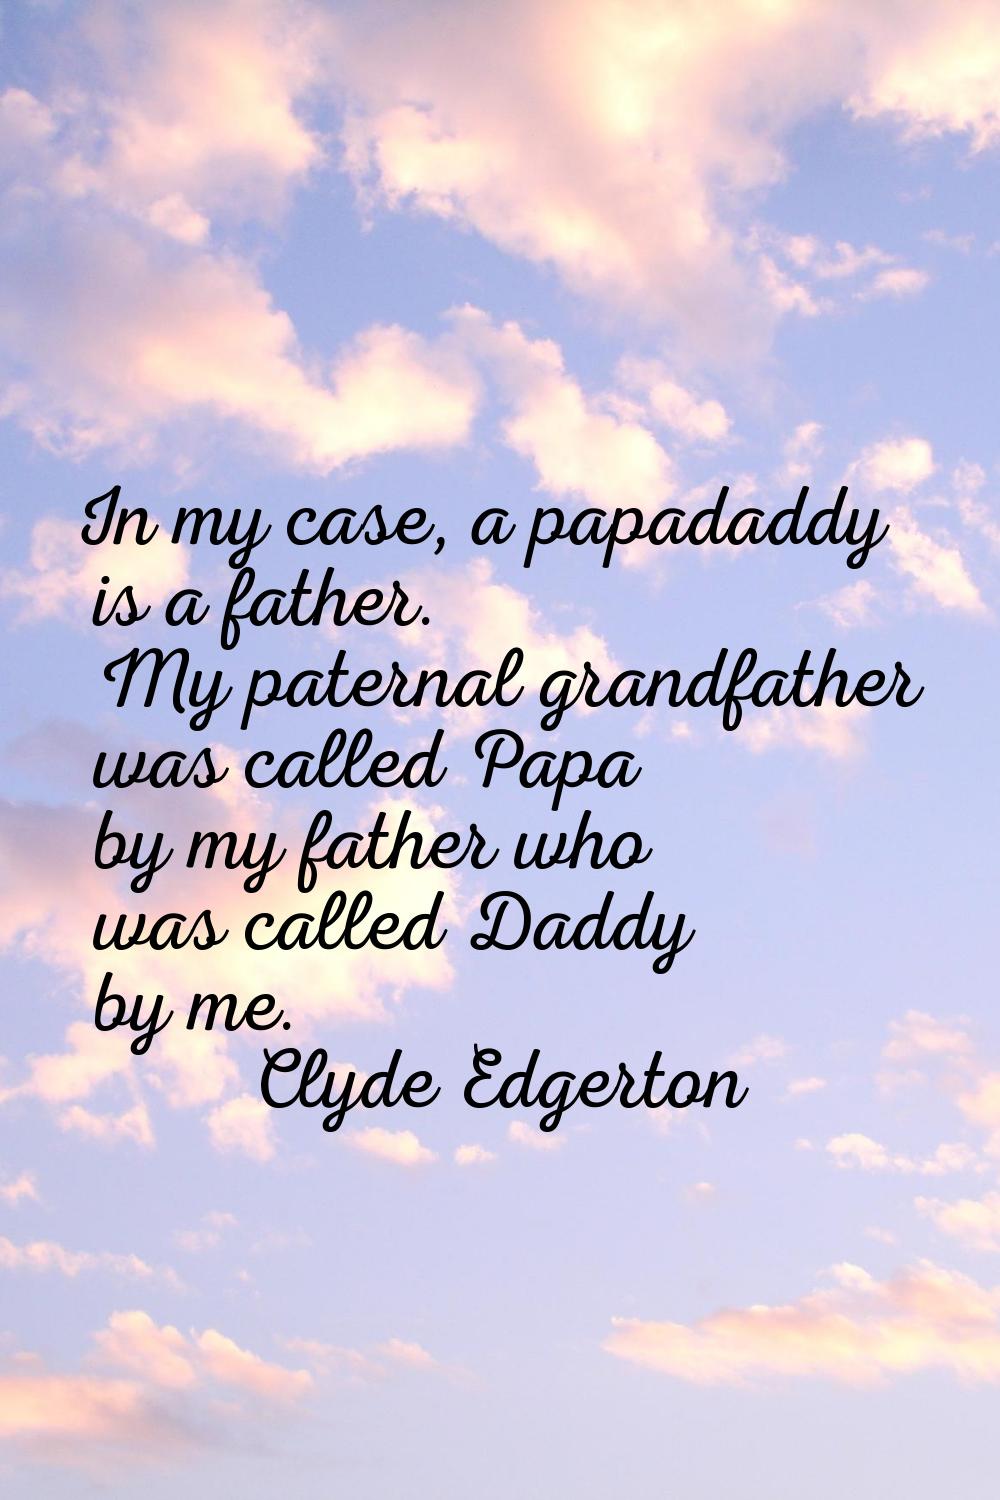 In my case, a papadaddy is a father. My paternal grandfather was called Papa by my father who was c